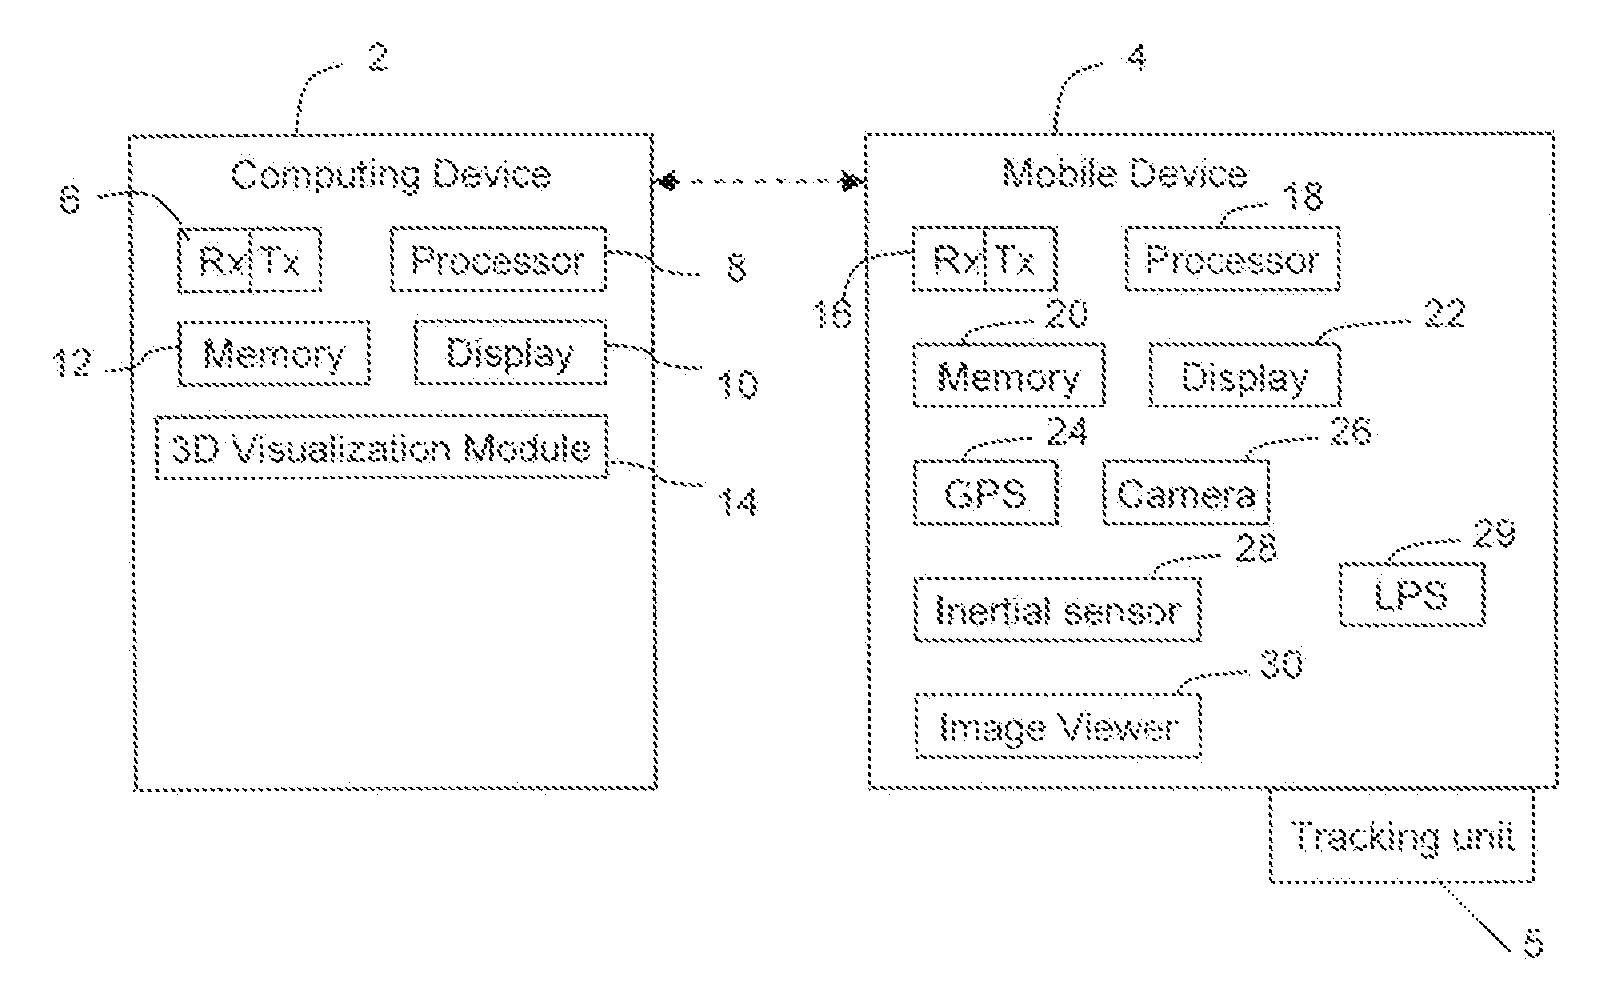 System and Method for Visualizing Virtual Objects on a Mobile Device